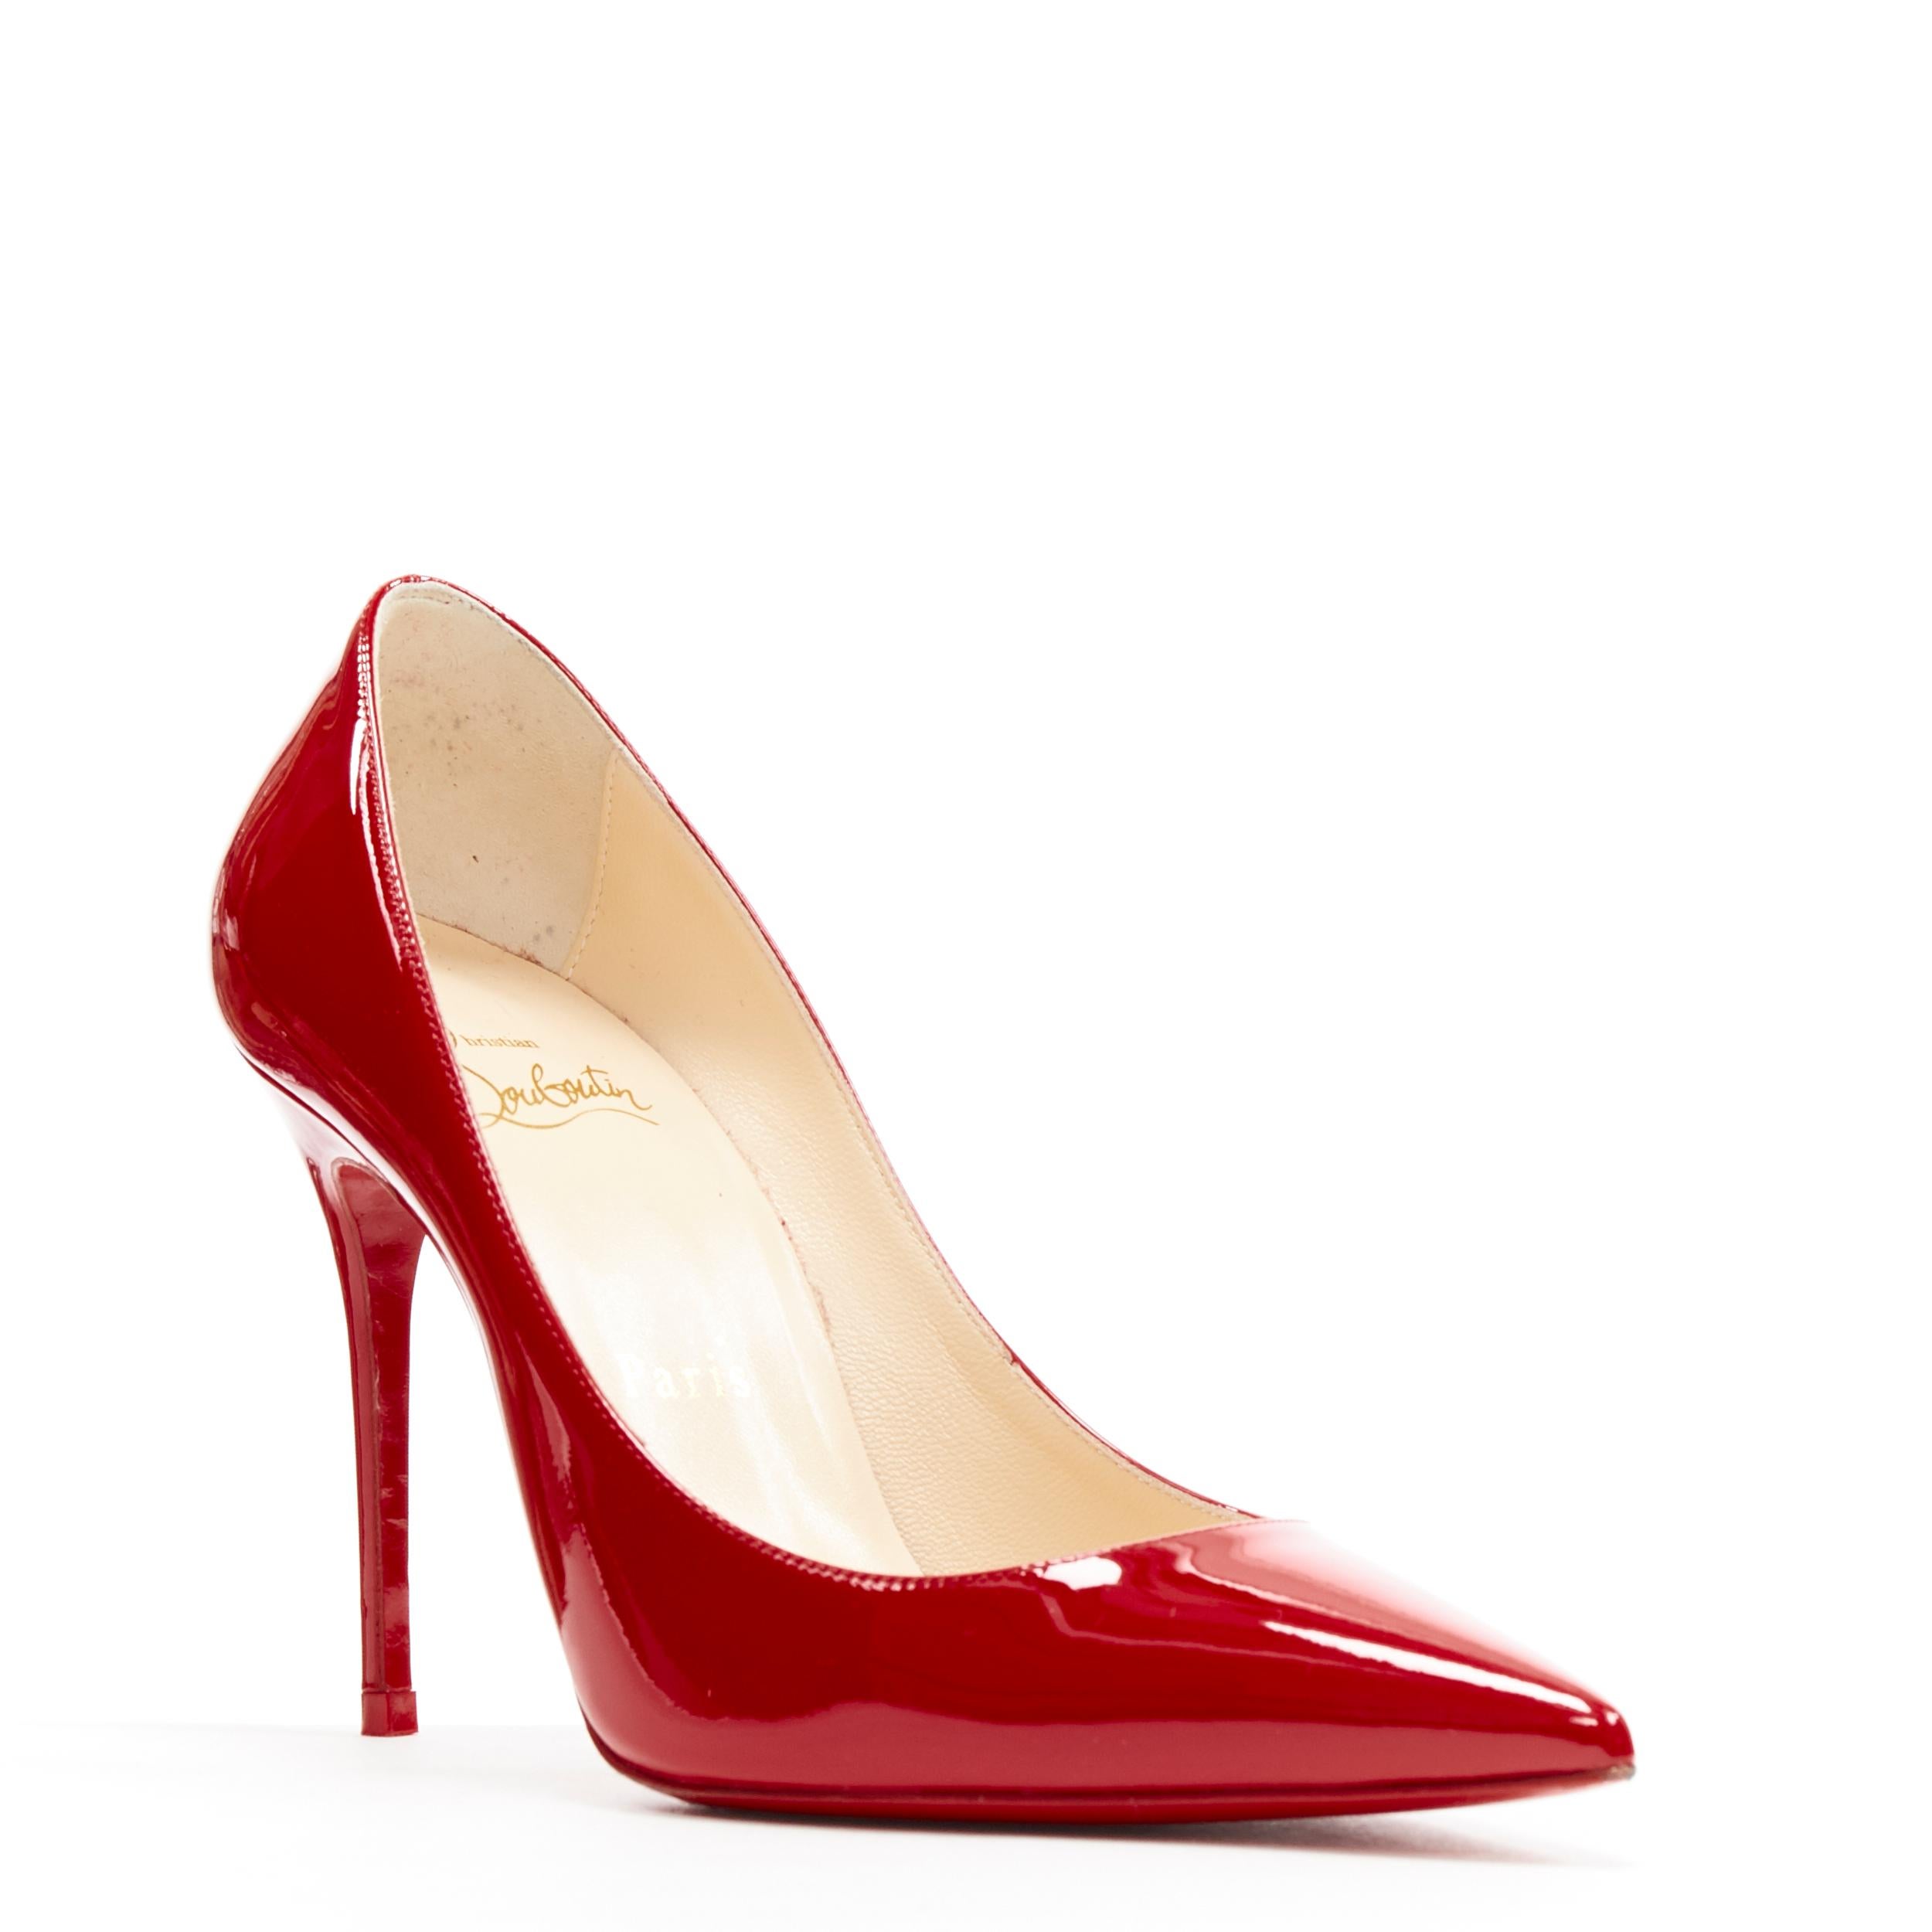 CHRISTIAN LOUBOUTIN Kate 100 R251 Loubi red patent pigalle stiletto pump EU35.5
Brand: Christian Louboutin
Designer: Christian Louboutin
Model Name / Style: Kate 100
Material: Patent leather
Color: Red
Pattern: Solid
Extra Detail: High (3-3.9 in)